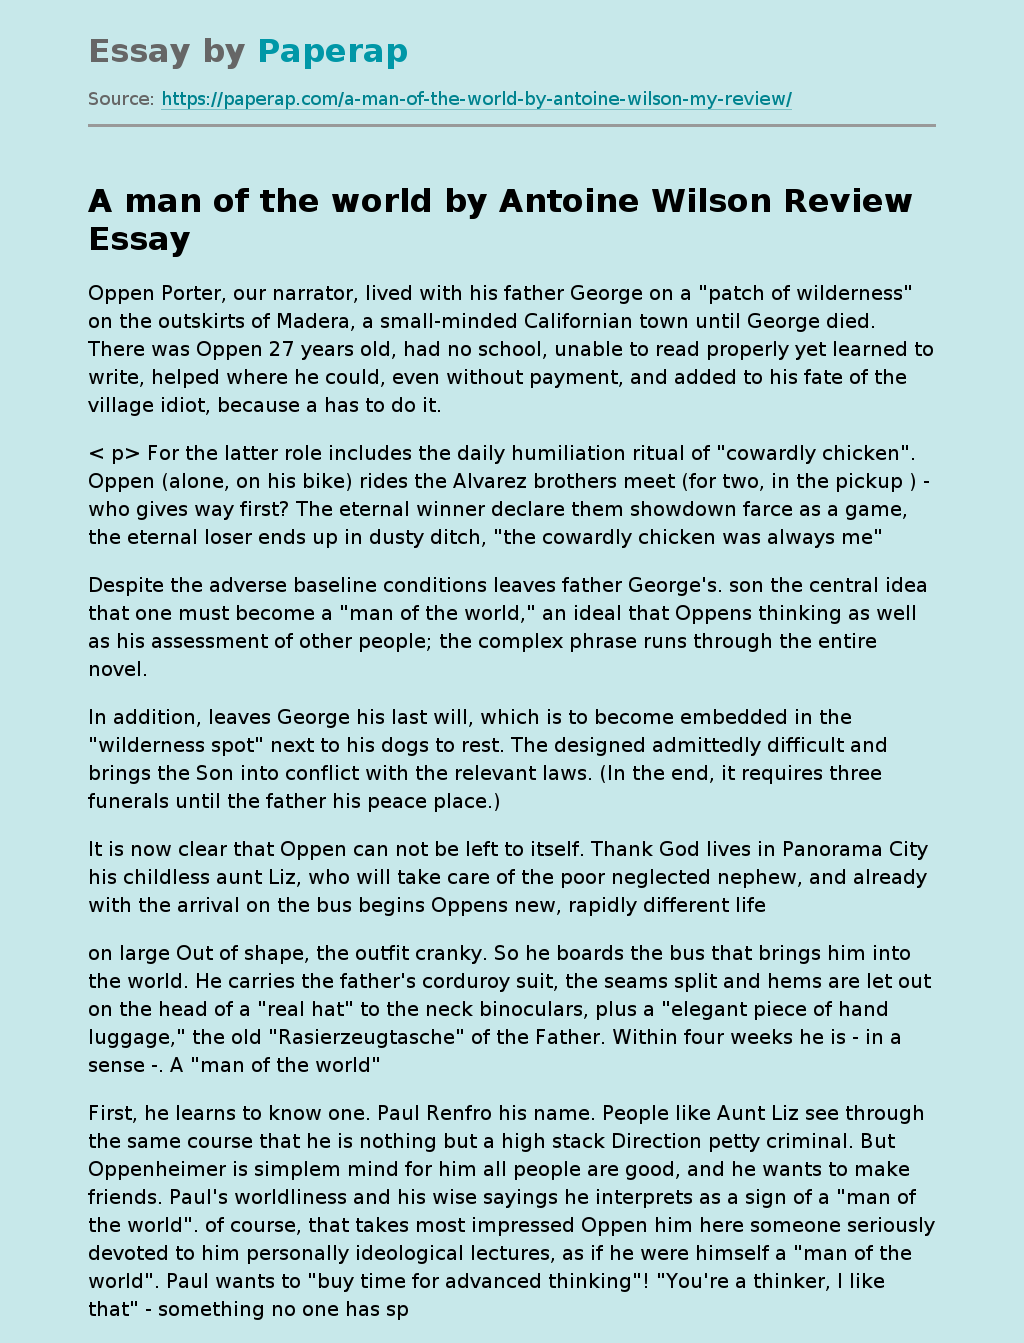 A man of the world by Antoine Wilson Review